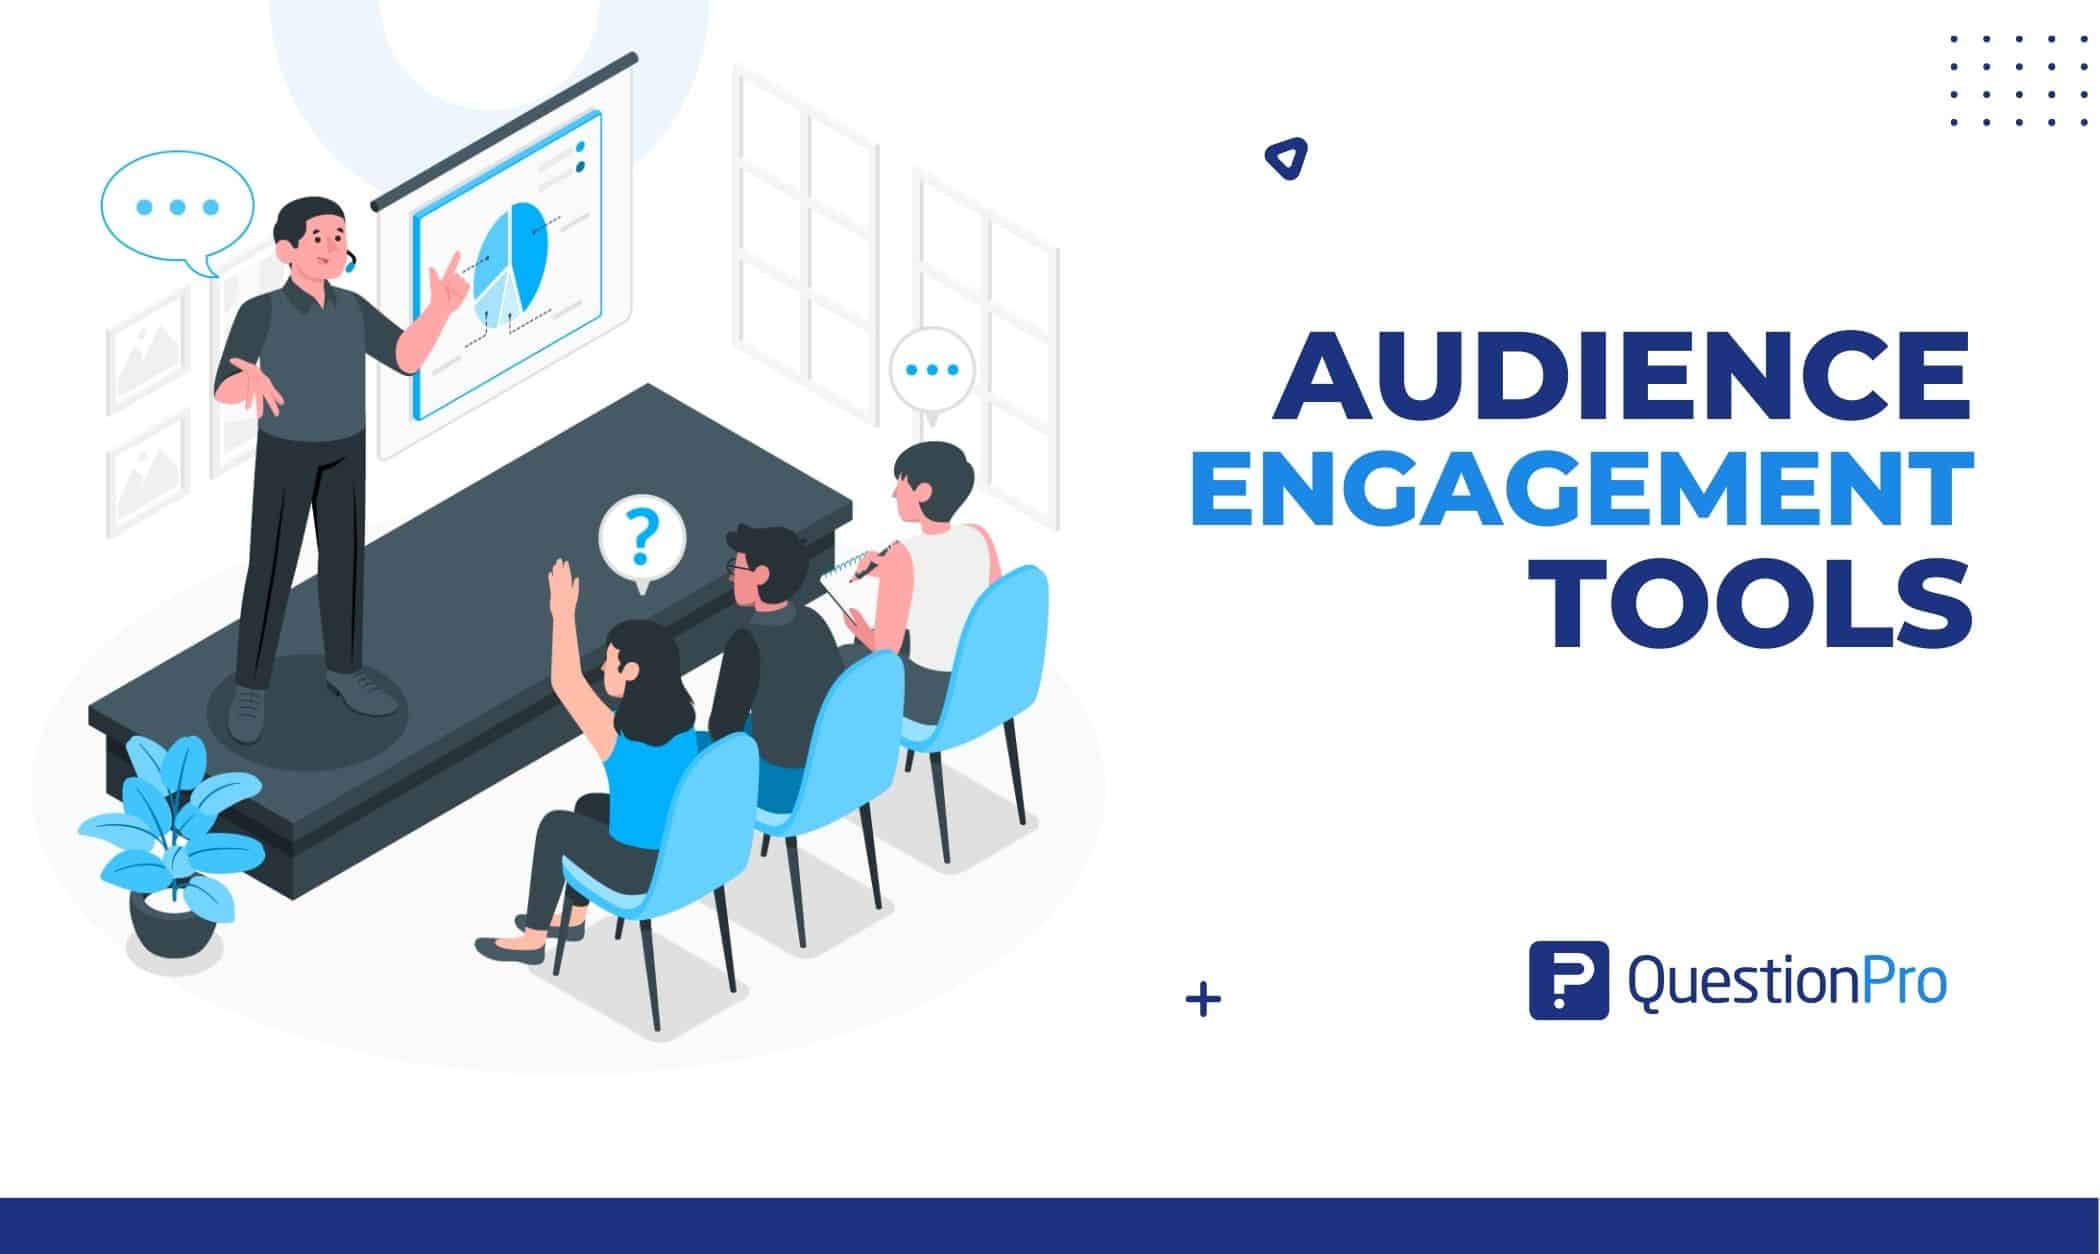 Audience Engagement Tools: What it is, why to use + Top 5 tools